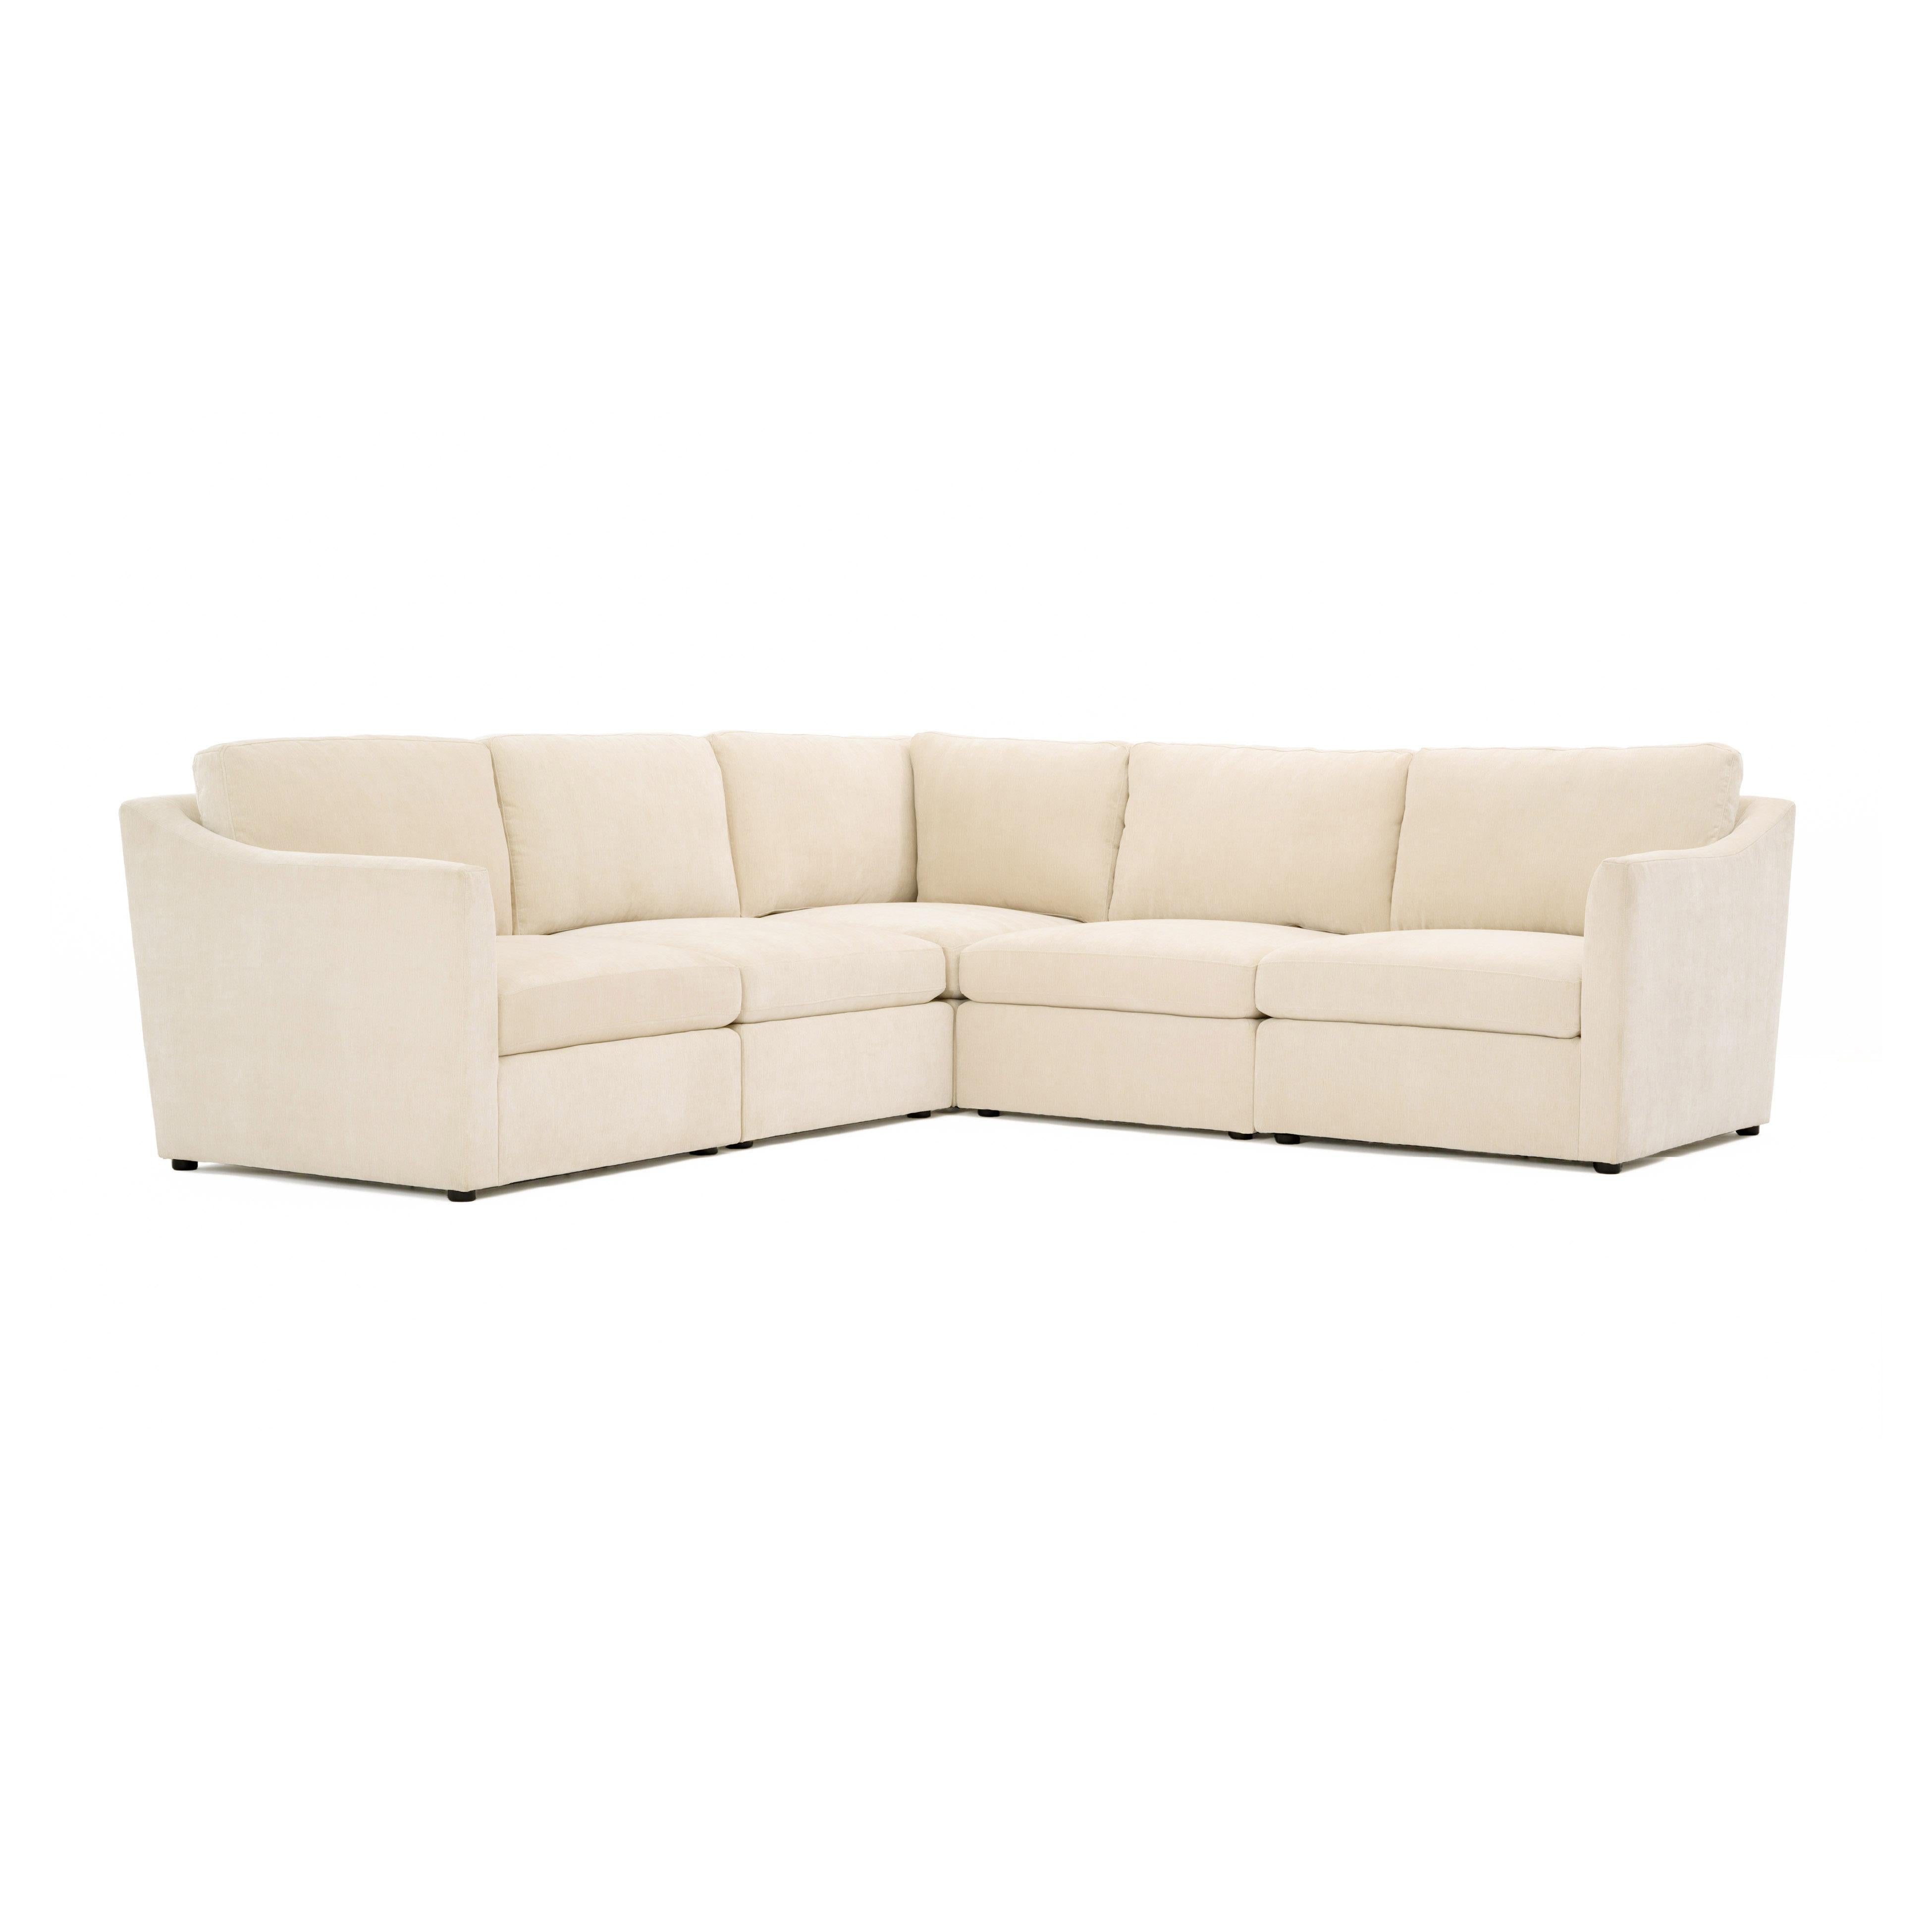 Tov Furniture Sectionals - Aiden Beige Modular L Sectional